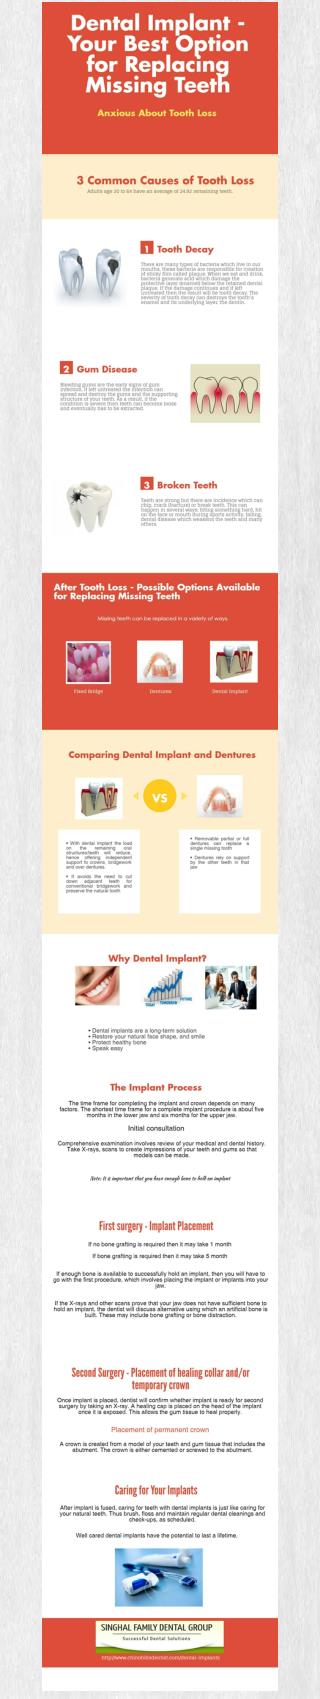 Dental Implant - Your Best Option for Replacing Missing Teeth